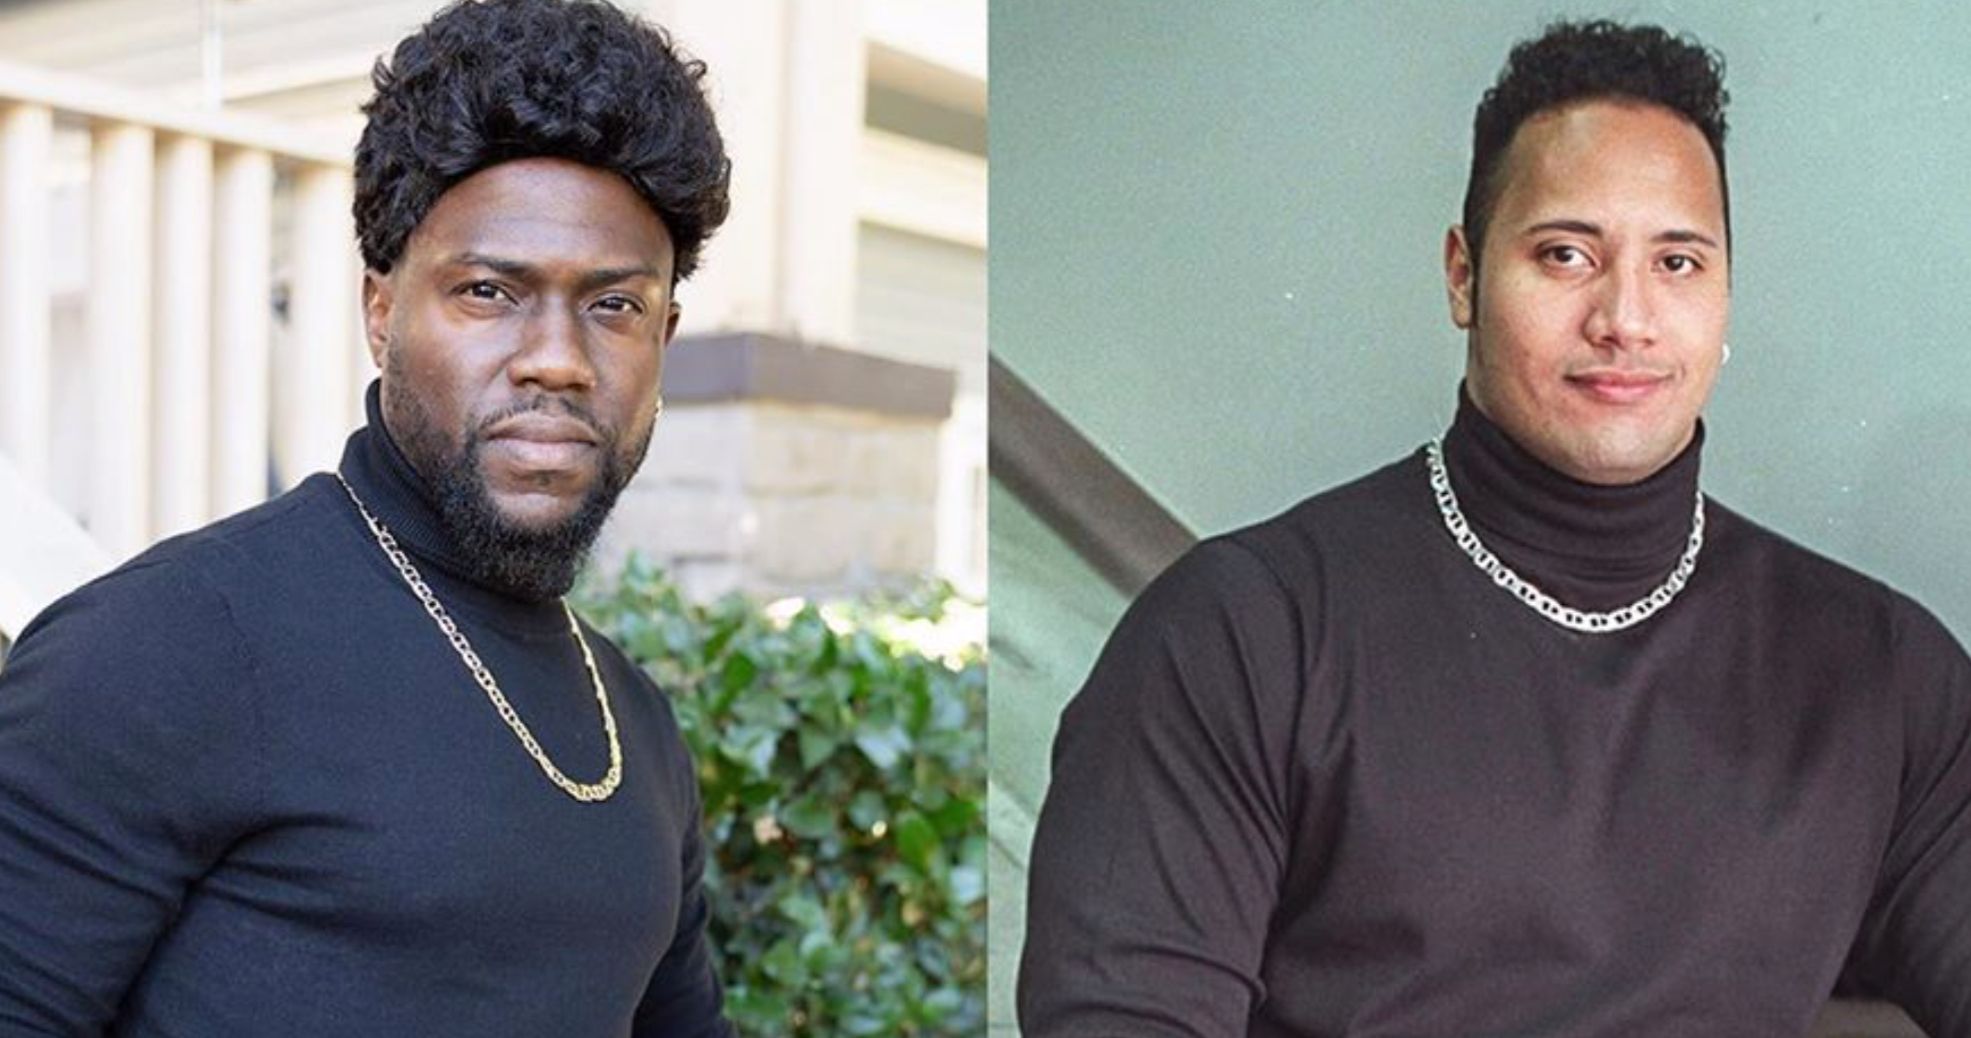 Kevin Hart Wins Halloween Dressed as The Rock in His Turtleneck Years